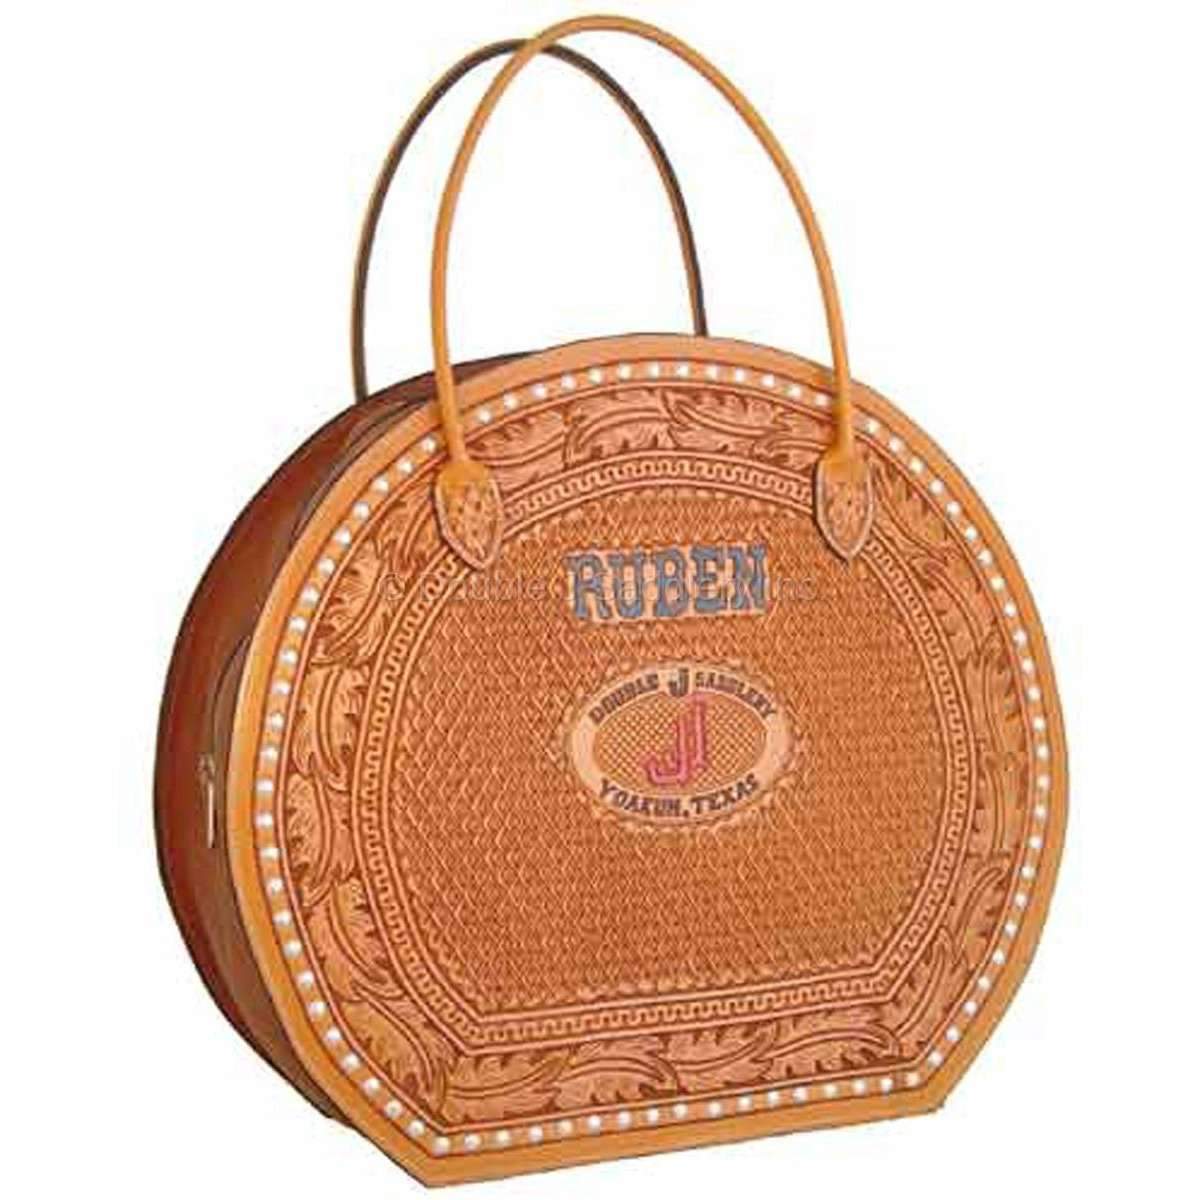 Classic Ropes  Deluxe Rope Bag  Frontier Trailers  Roping Supply